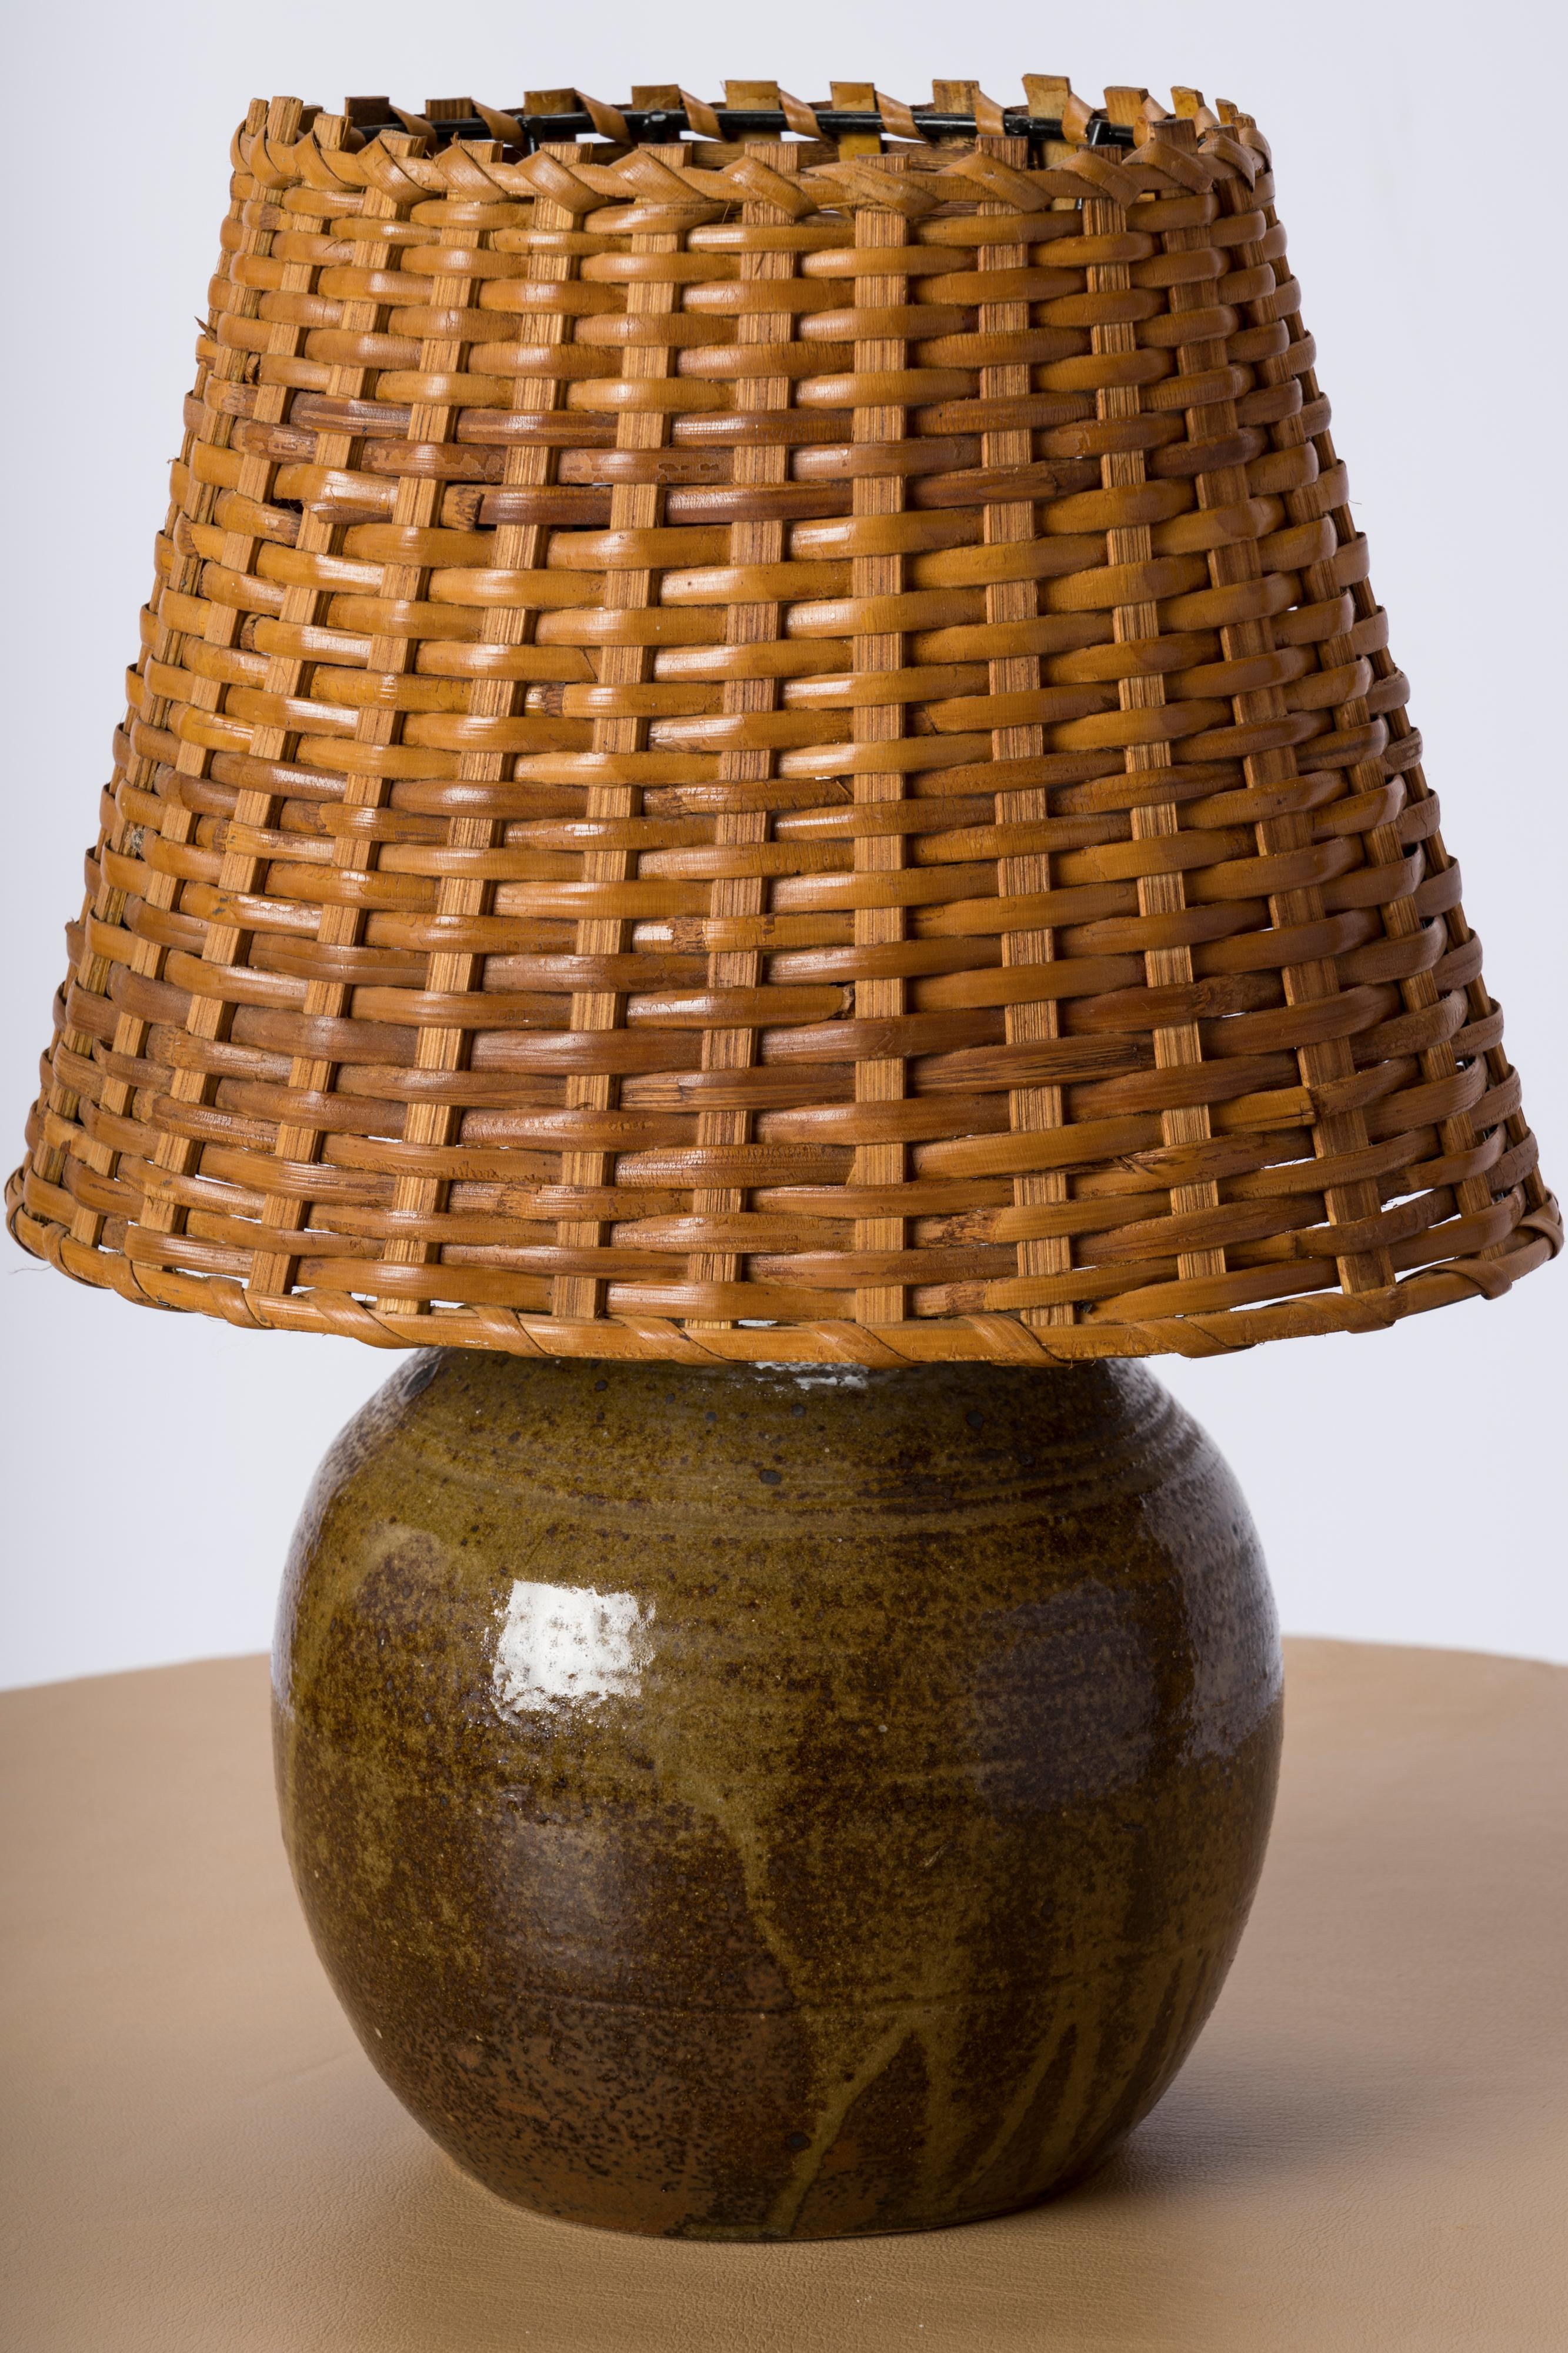 Chic petite glazed ceramic table lamp with braided wicker shade. Nuances of greens and browns. France 1970's.
European socket and wiring.
This lamp will ship from France and can be returned to either France or to a LIC NY location.
Price does not